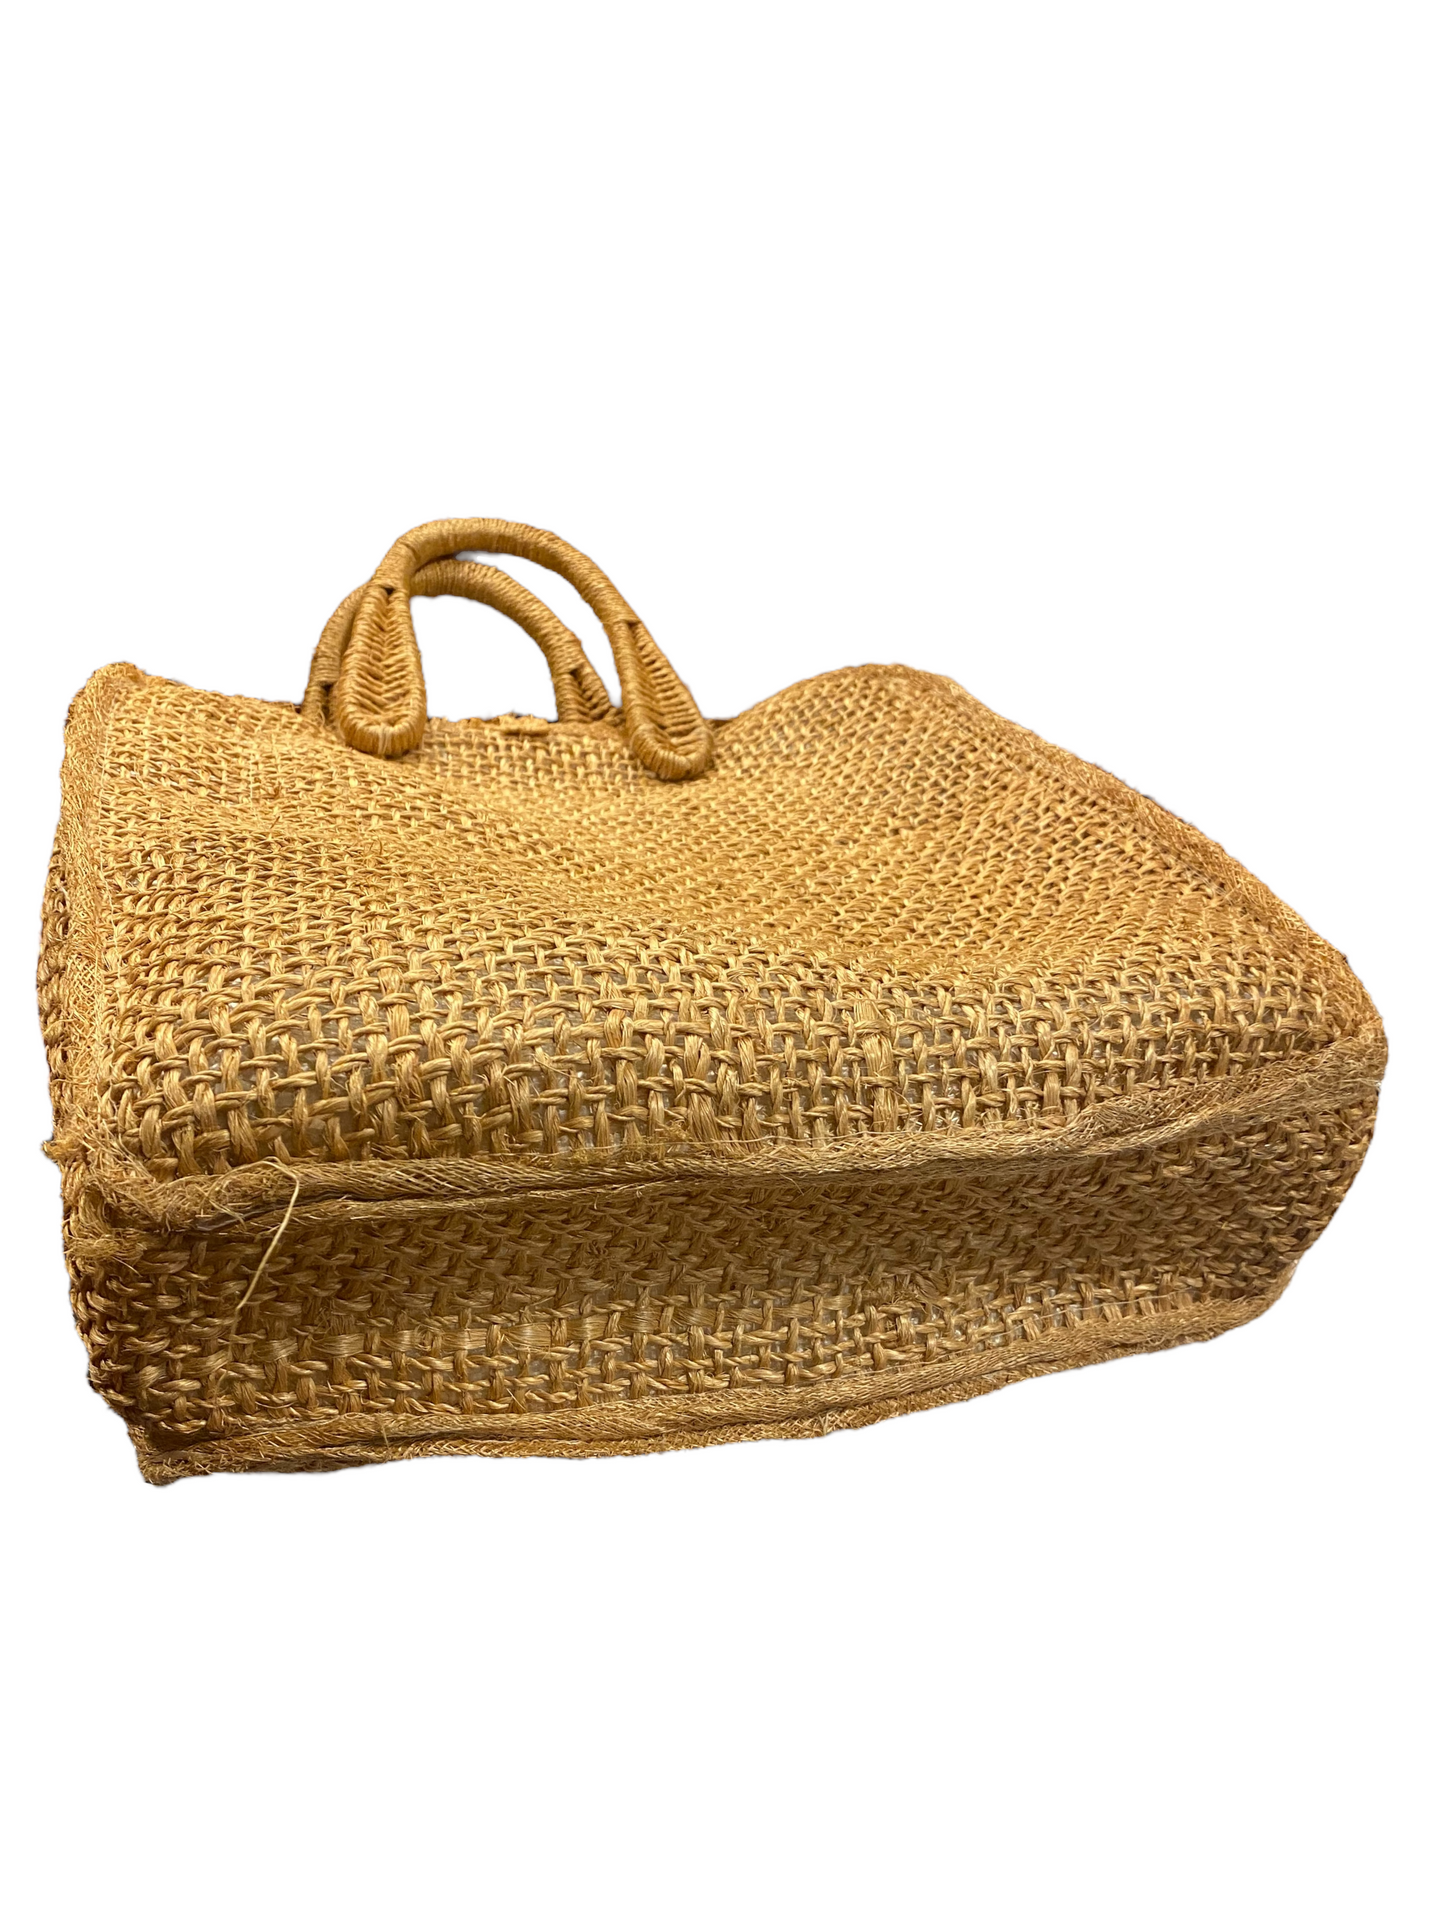 Vintage 1960s Rattan Floral Handbag Tote with Raffia Embroidery and Pockets Philippines